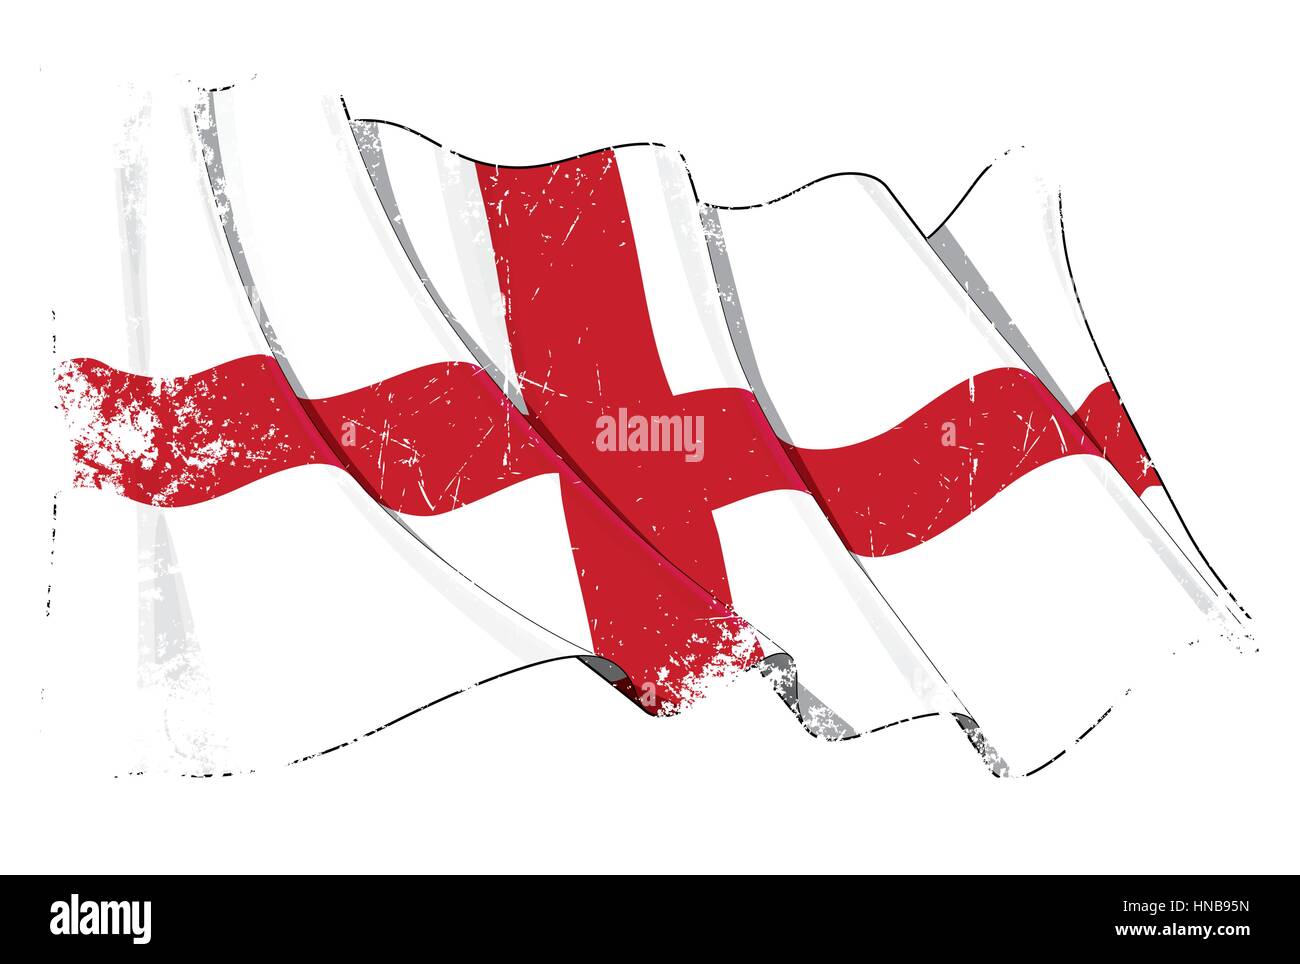 Grunge Vector Illustration of a waving English flag. All elements neatly organized. Texture, Lines, Shading & Flag Colors on separate layers for easy  Stock Vector